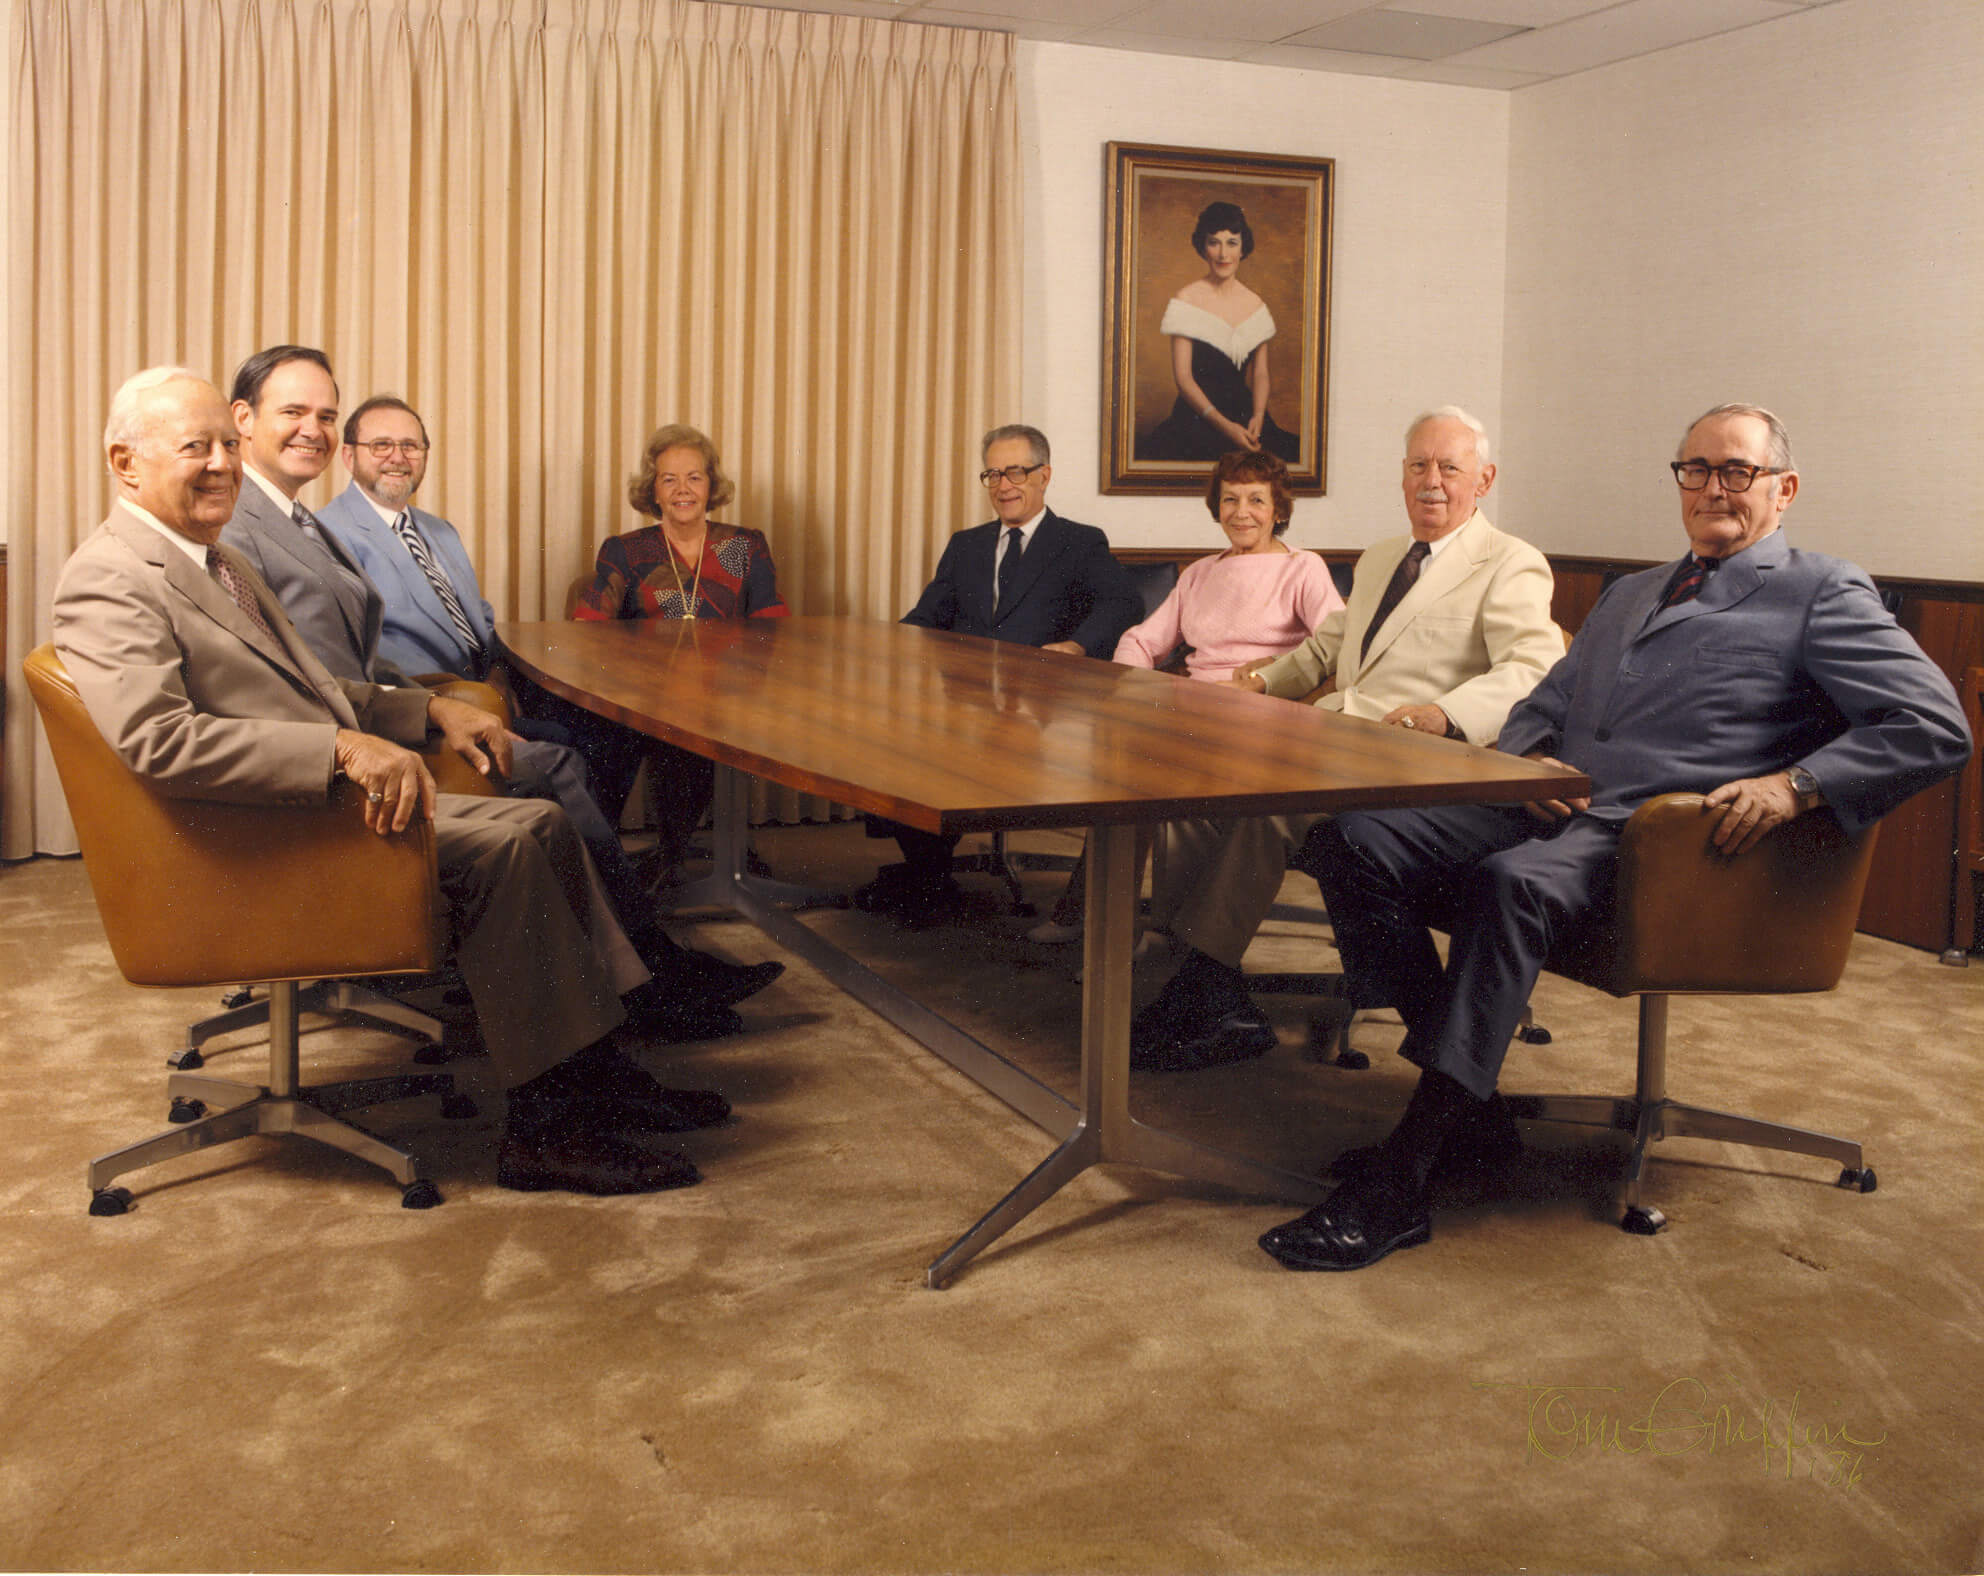 Old photo of Edyth Bush with the Charitable Foundation Board